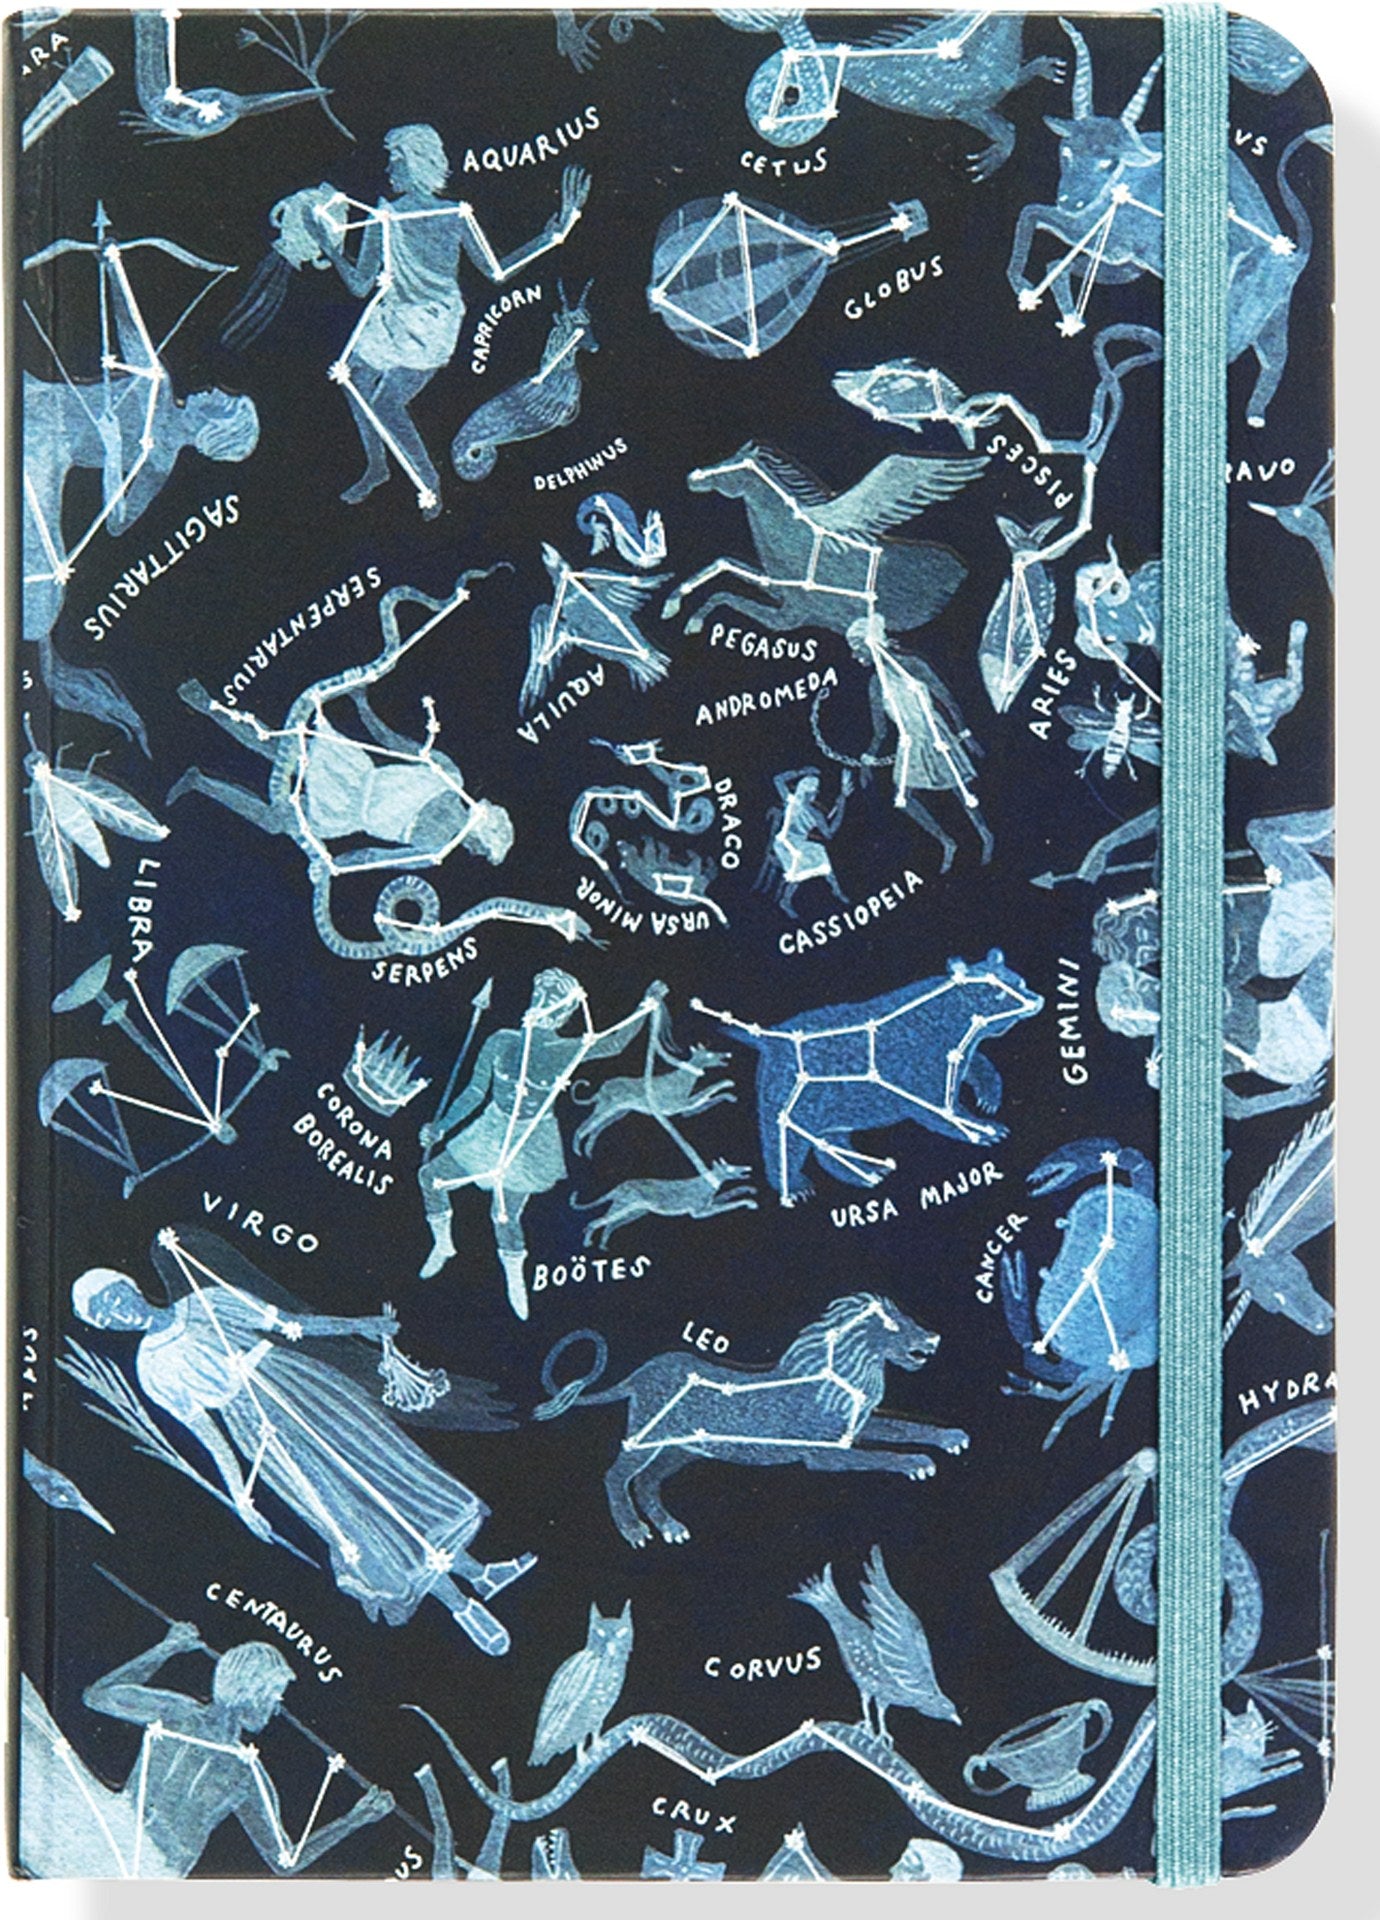 Constellations Journal cover with constellations in silver, and light blue elastic band